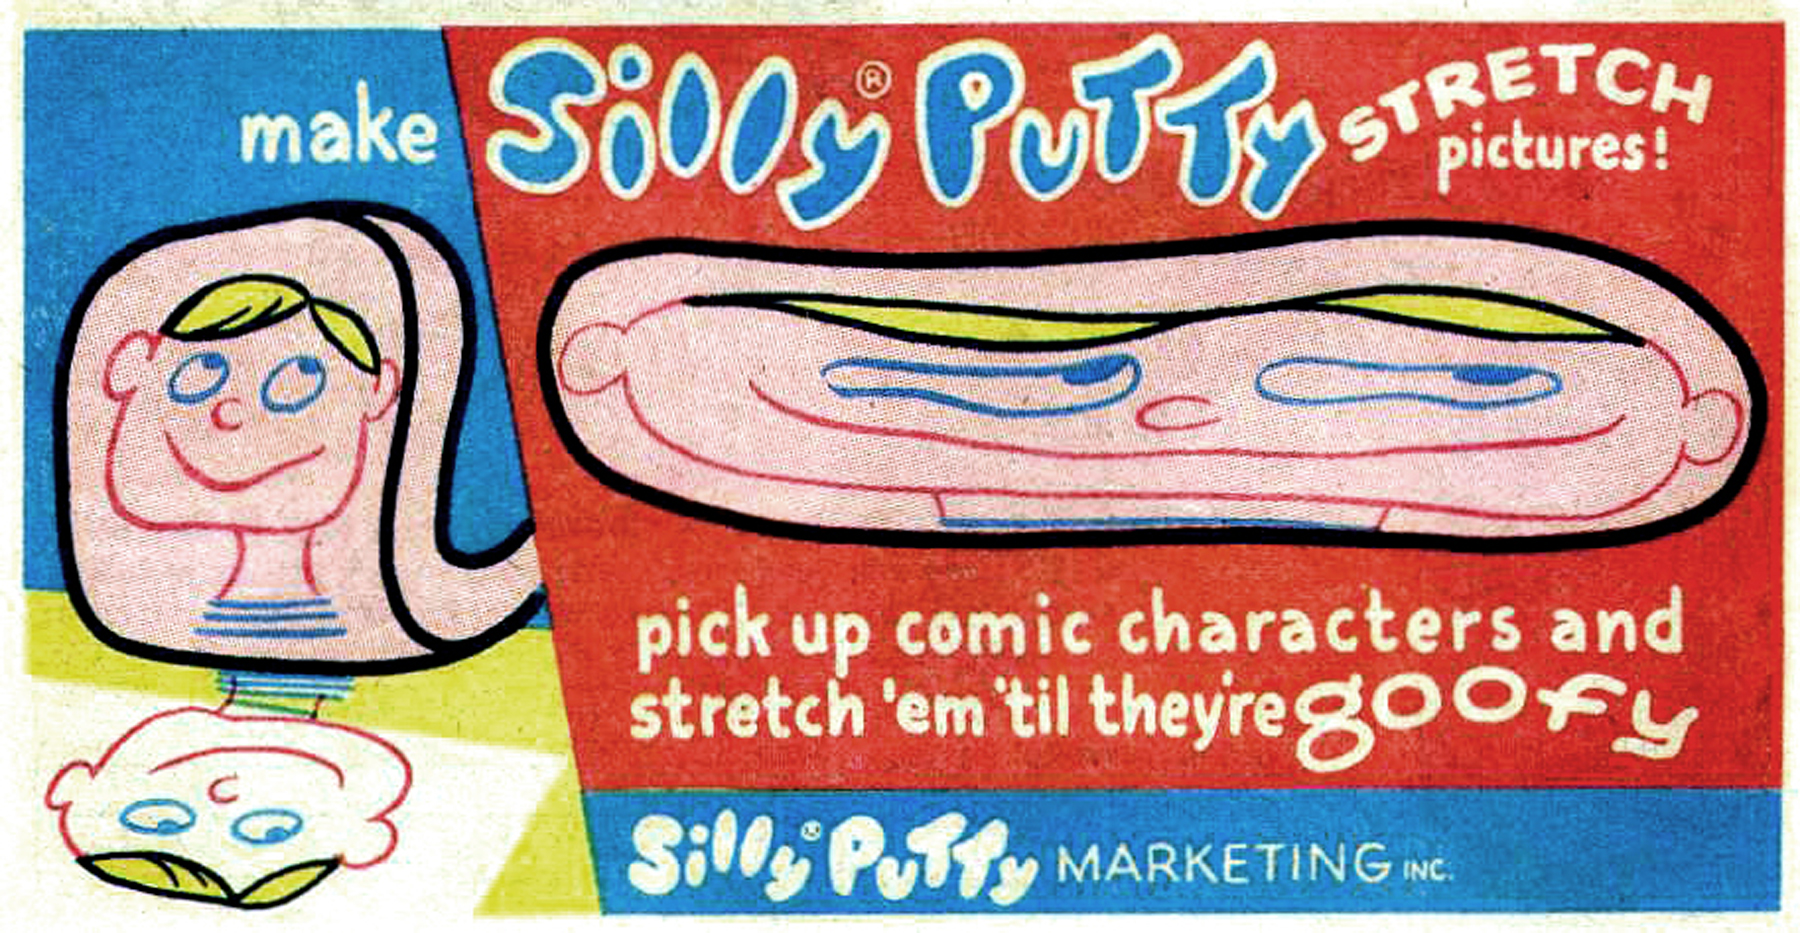 when was the silly putty invented